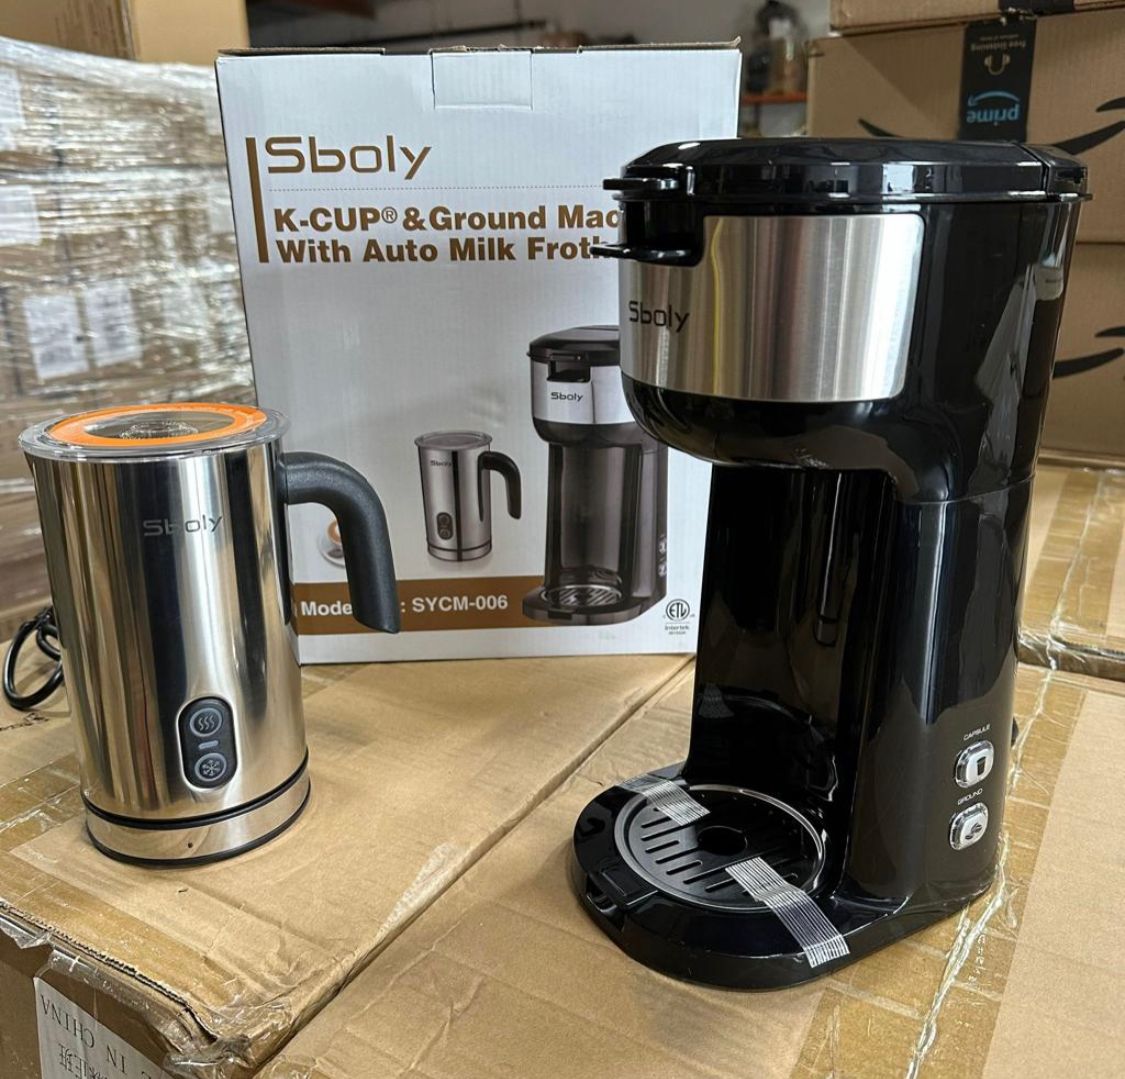 50890 - Sboly K-Cup & Ground Machine with Auto Milk Frother USA